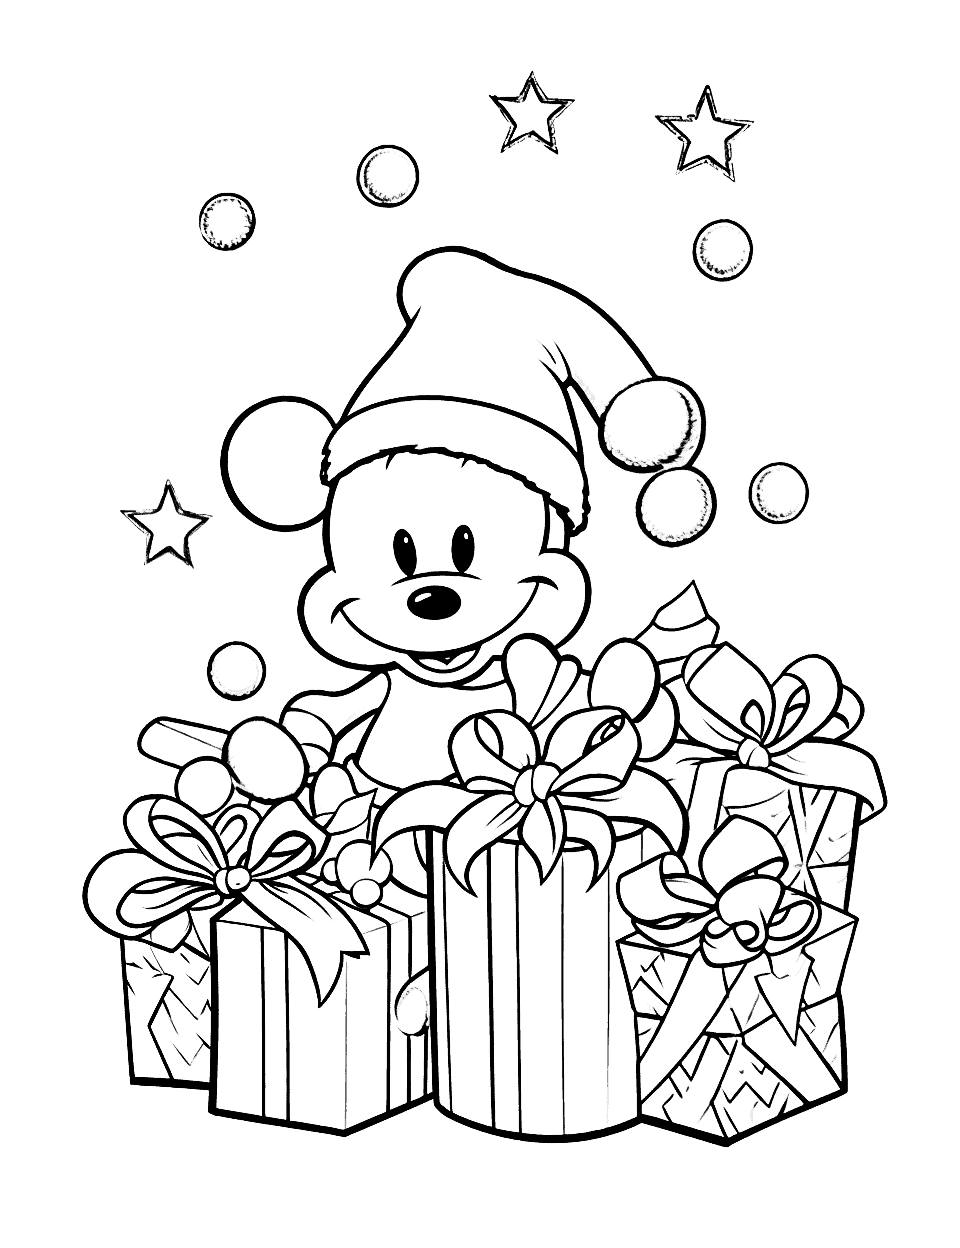 Mickey Mouse Christmas Coloring Page - A cute mouse opening presents on Christmas day.